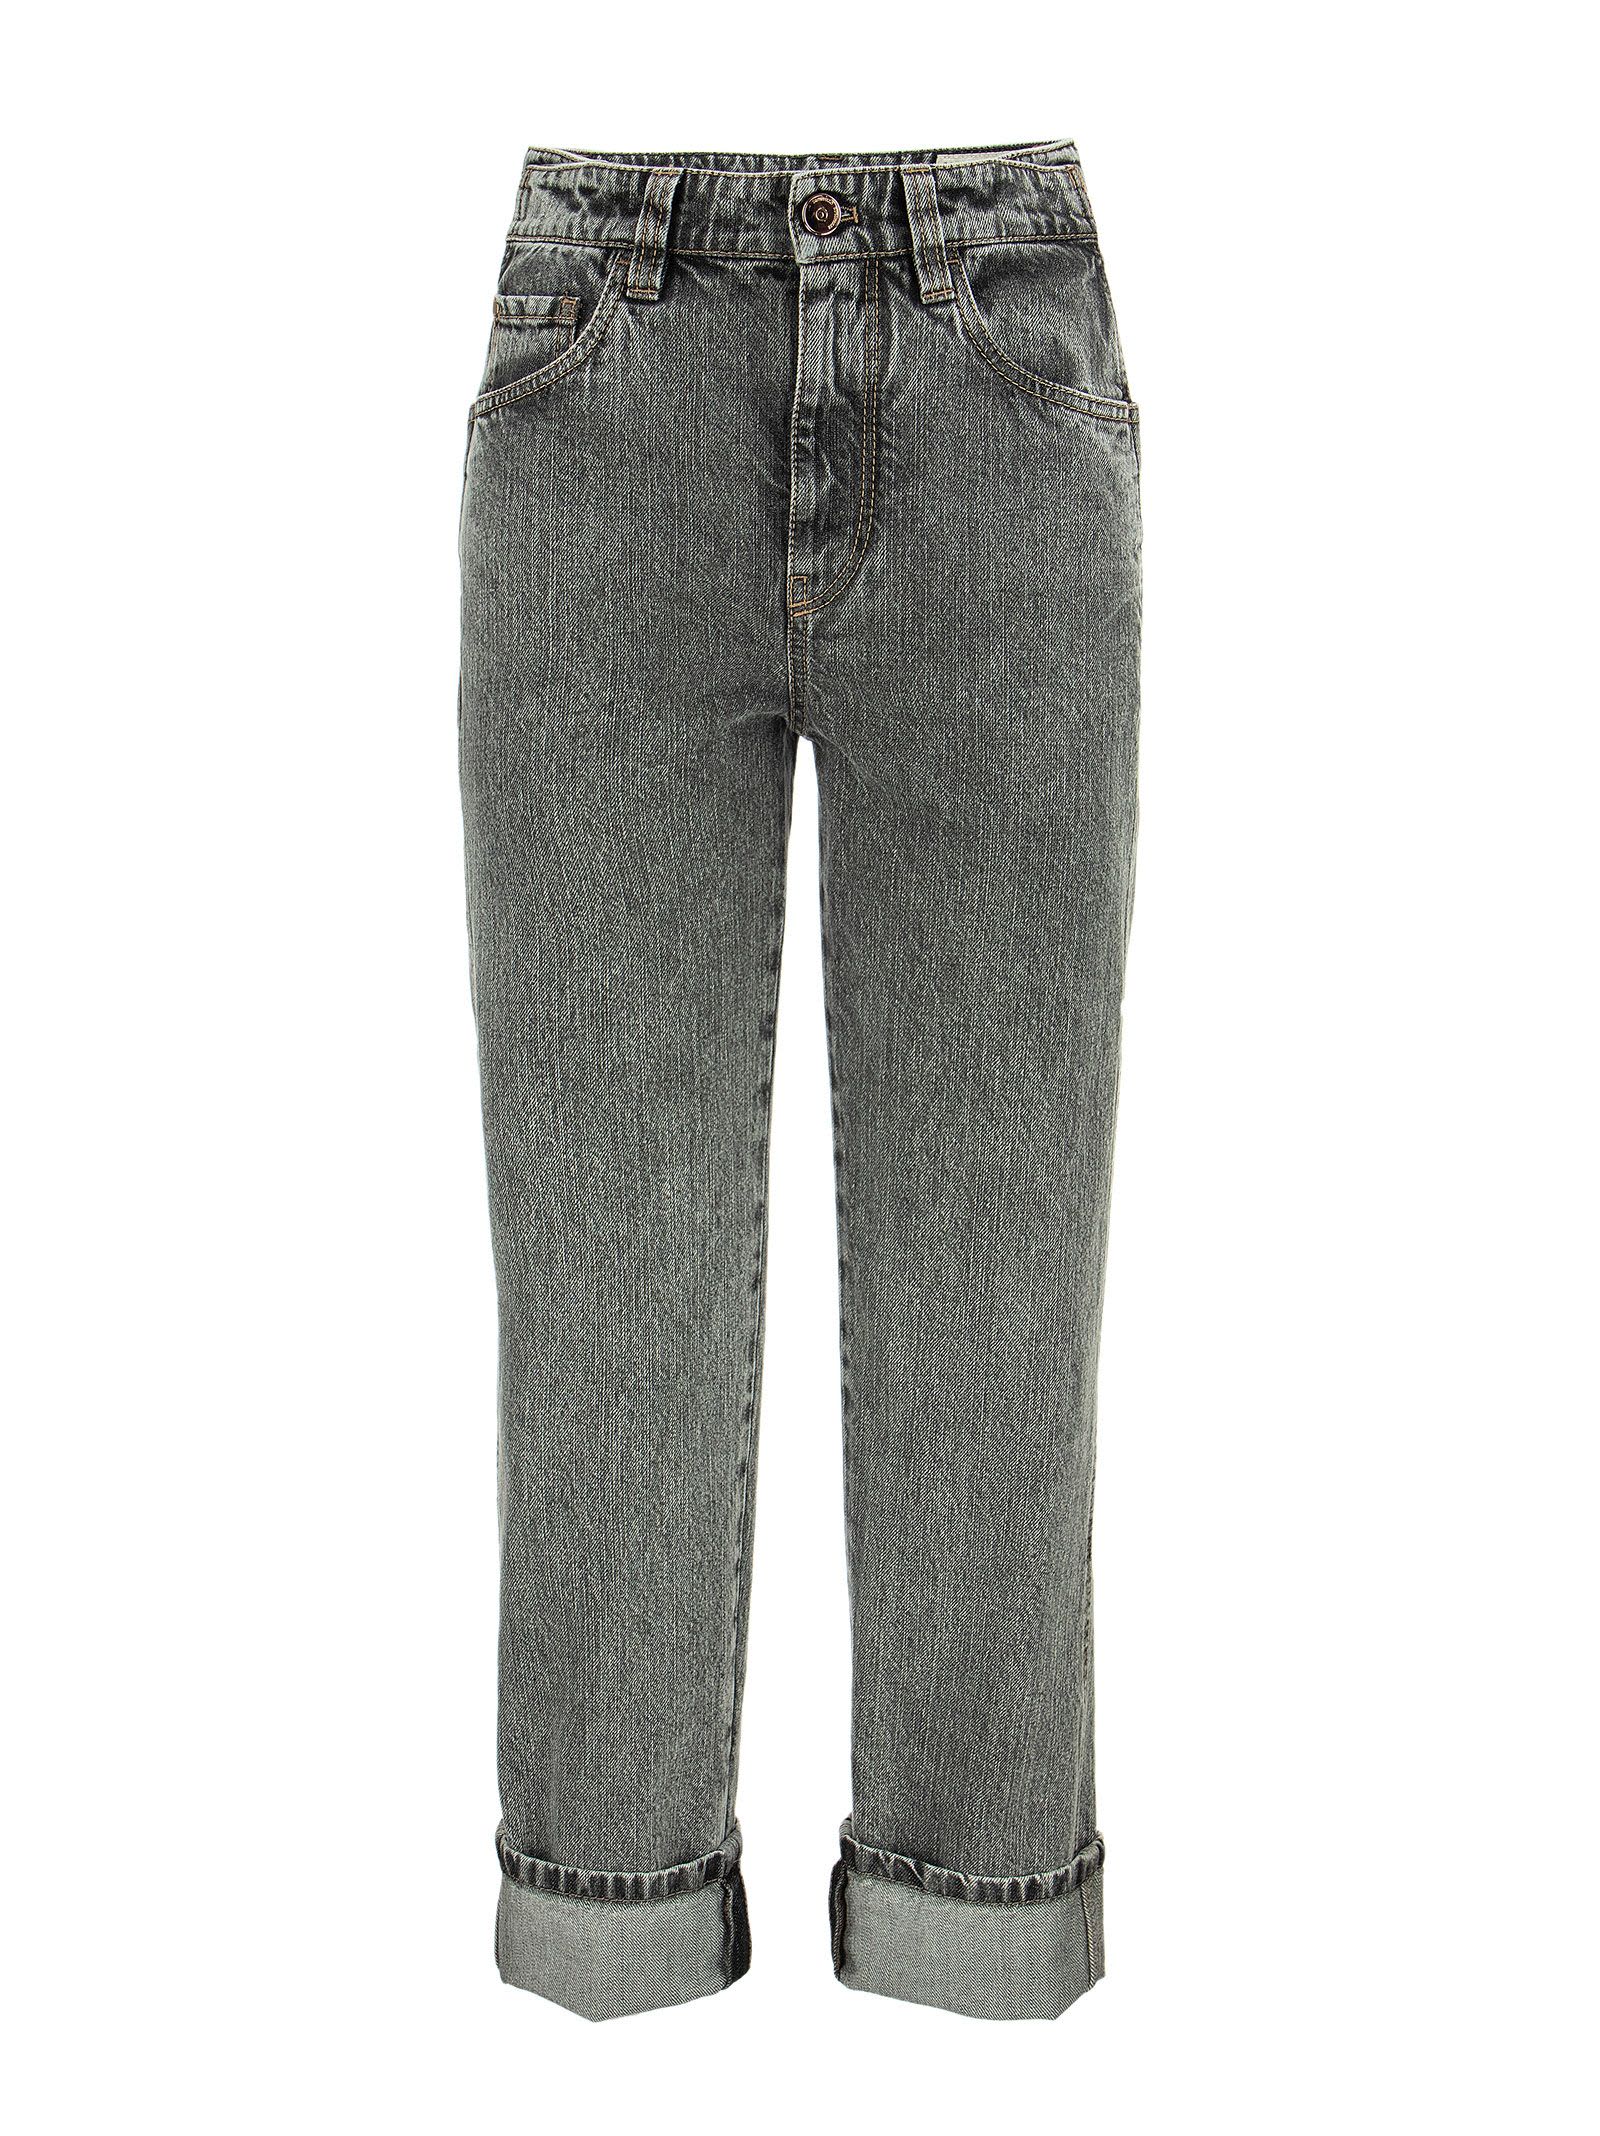 Brunello Cucinelli Authentic Denim Skater Trousers With precious Patch